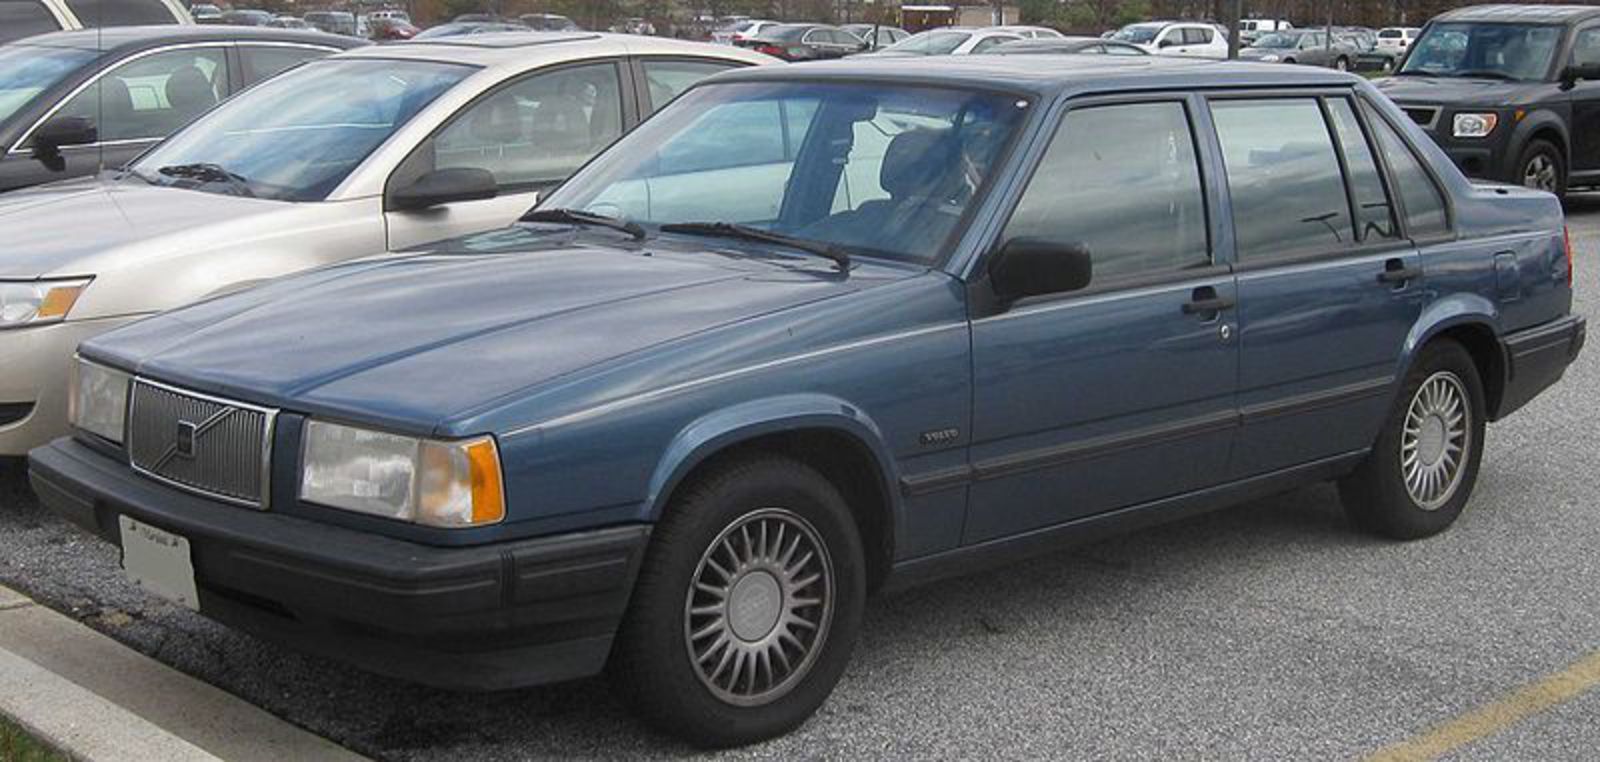 The Volvo 940 is among the variants of the 900 series of mid-size cars that